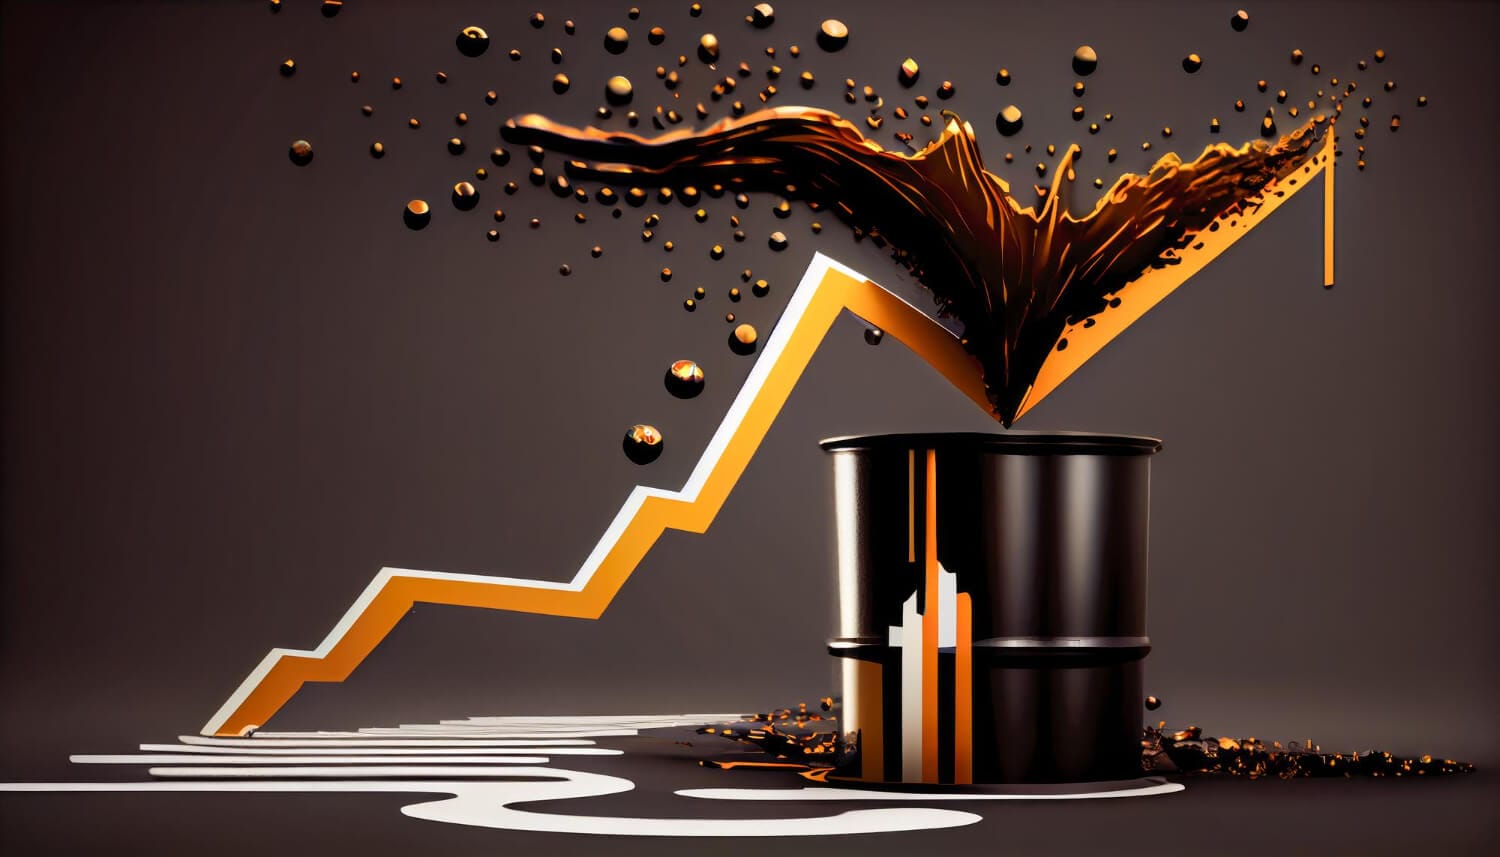 The Oil stock is expected to decrease